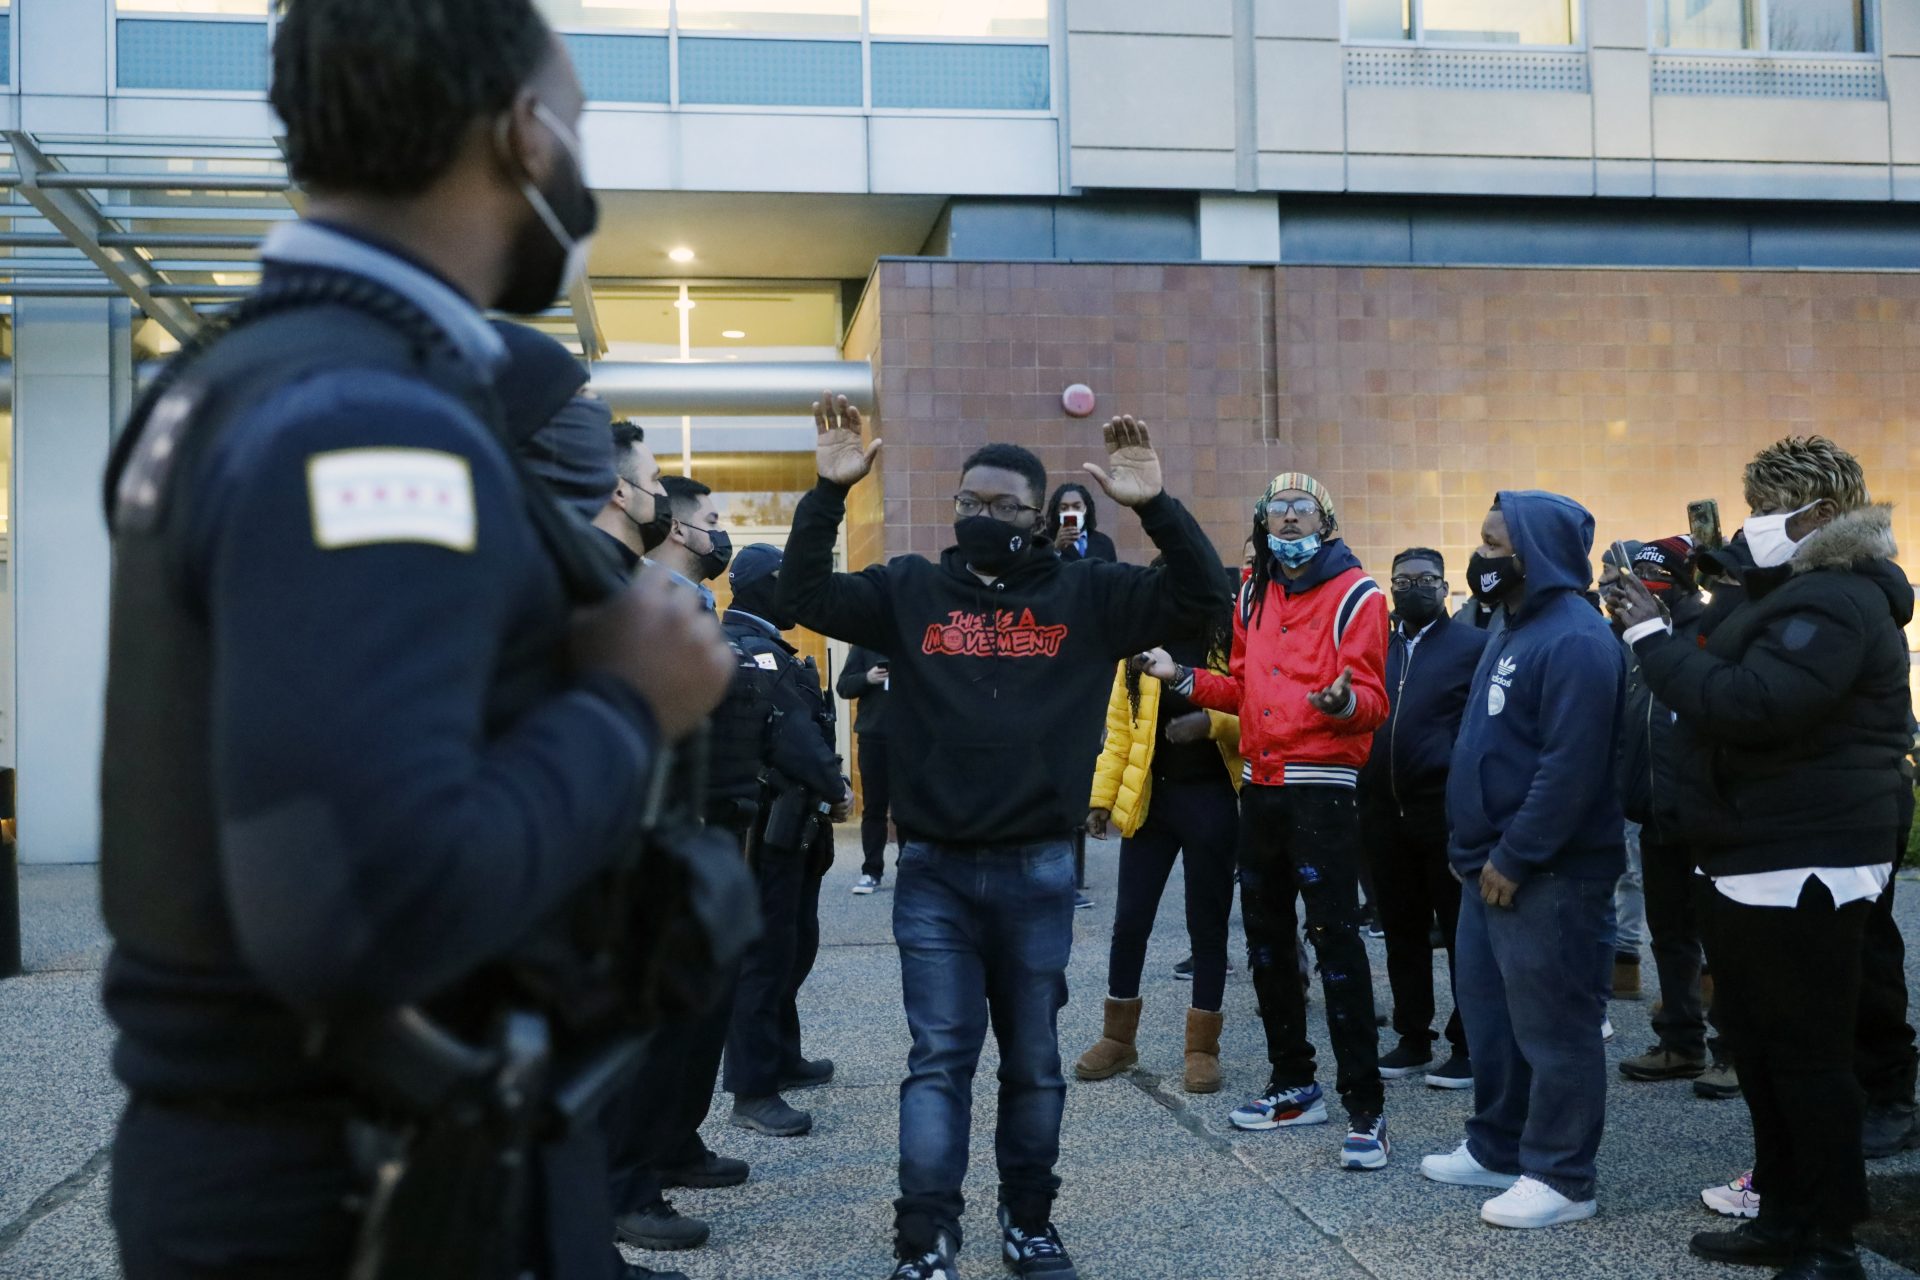 Activist Ja'Mal Green reacts as he walks towards a line of police officers outside Chicago police headquarters during a rally after the body camera video release of fatal police shooting of 13-year-old Adam Toledo on Thursday, April 15, 2021.